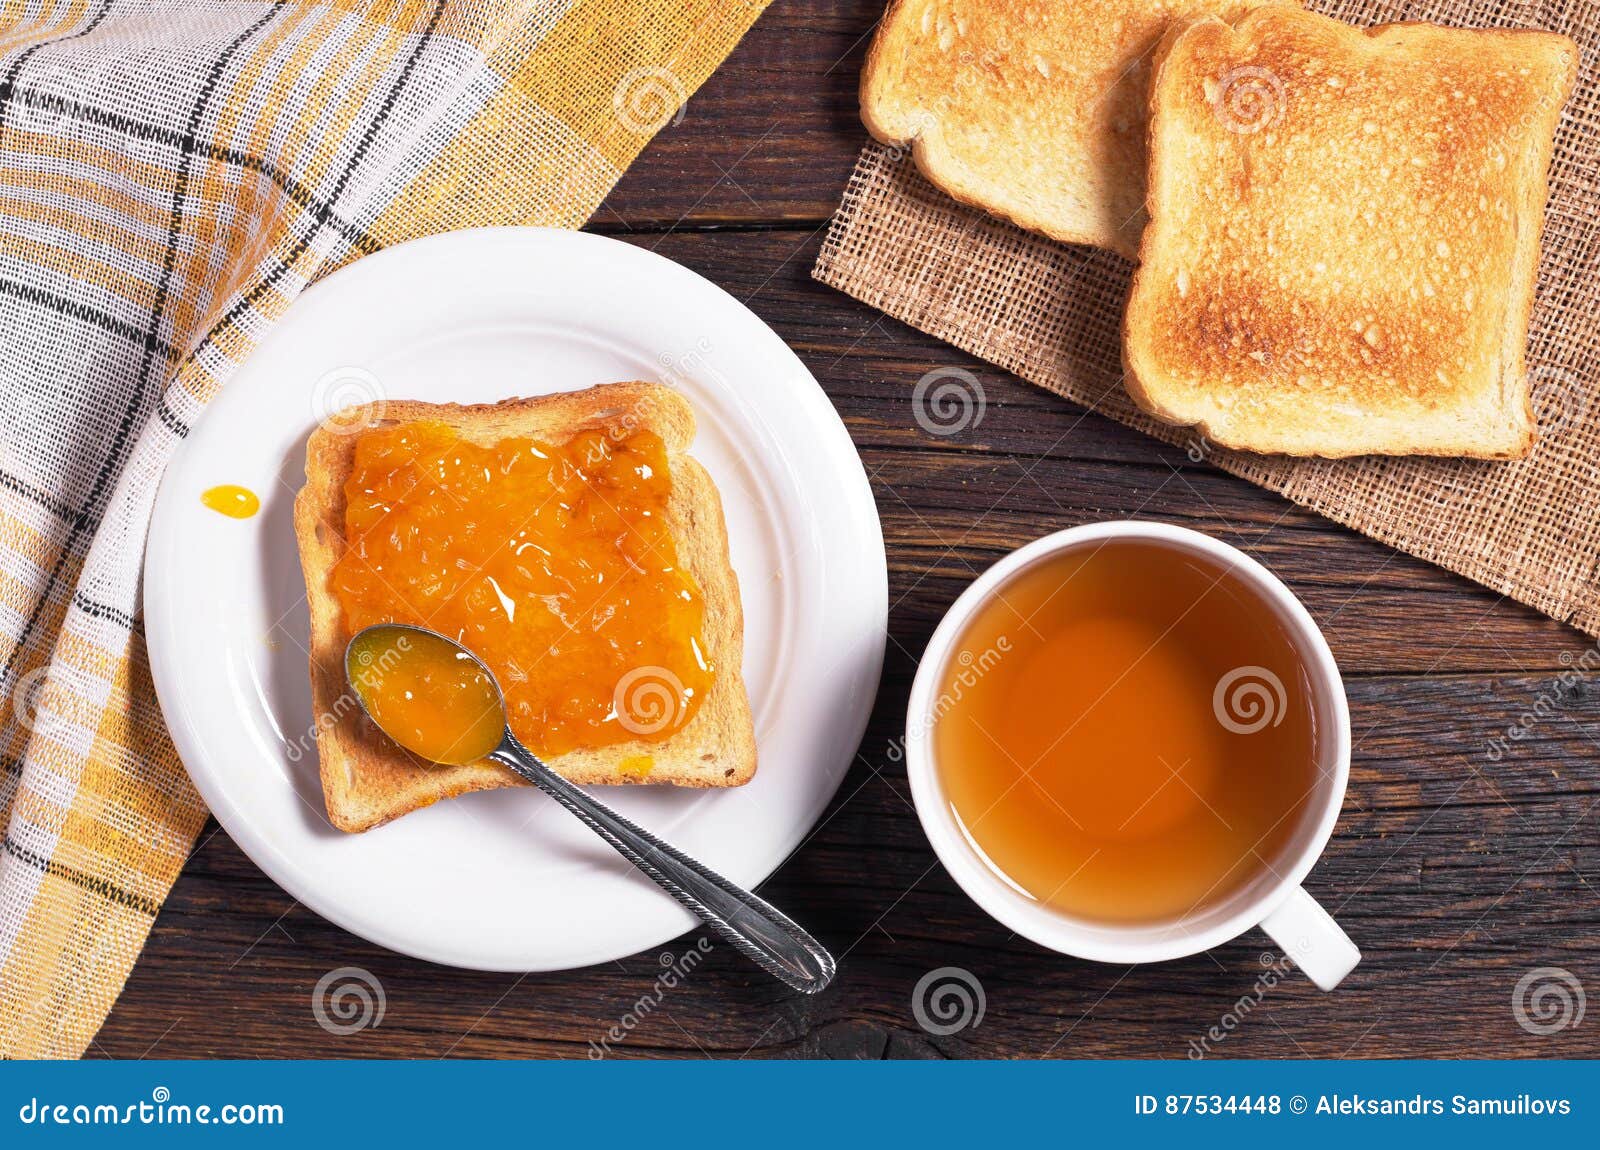 tea cup and toast with jam